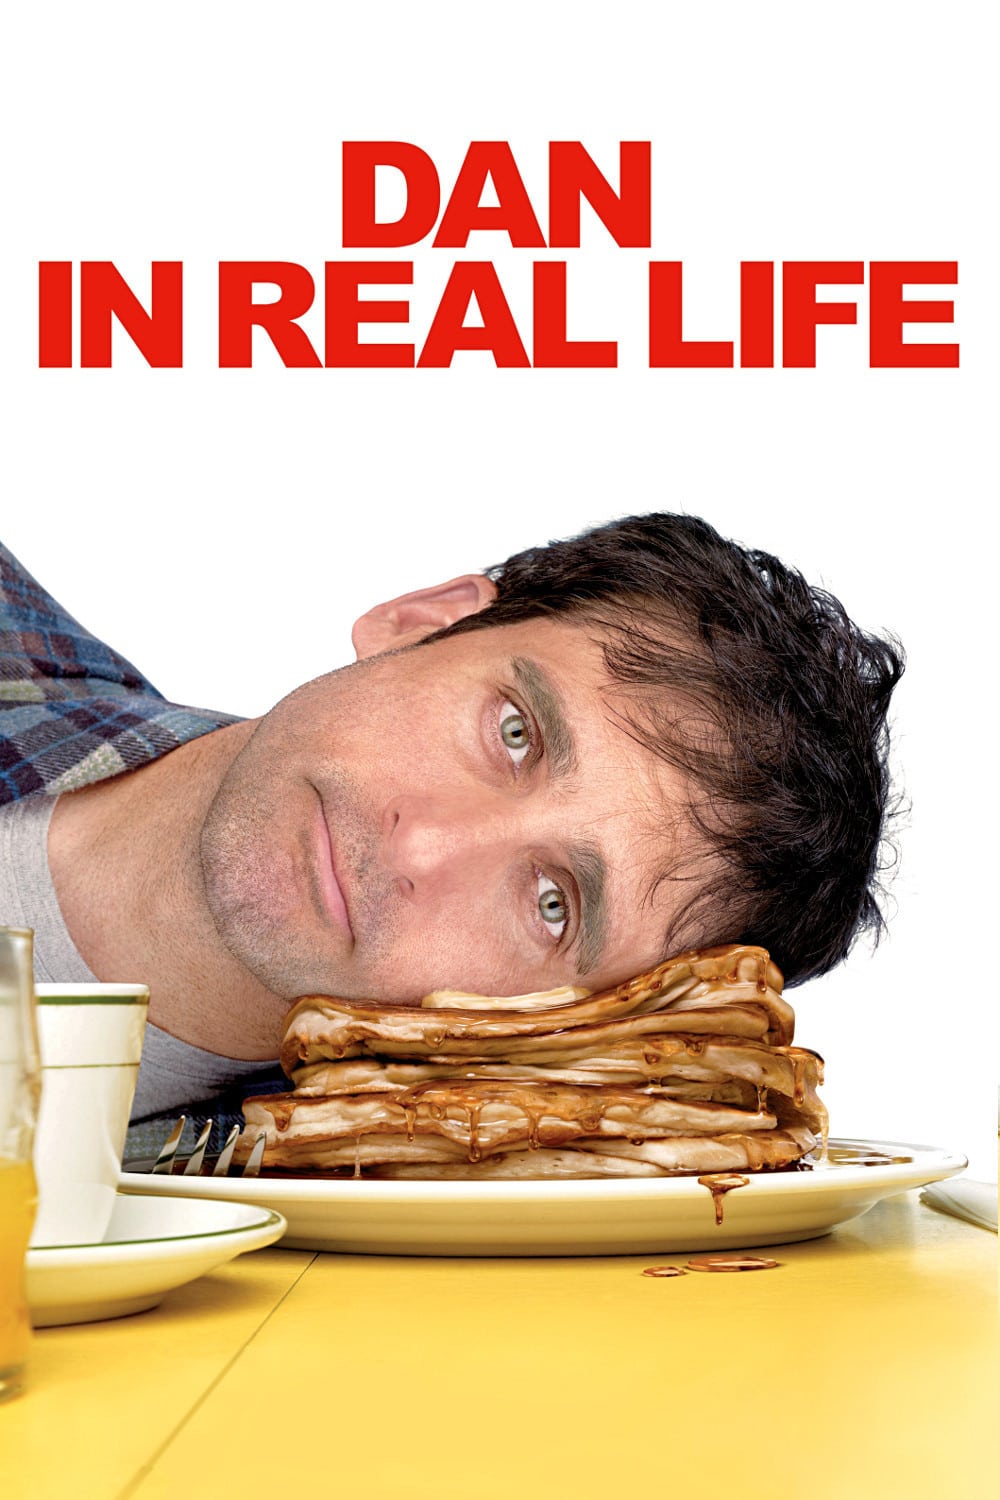 Poster for the movie "Dan in Real Life"